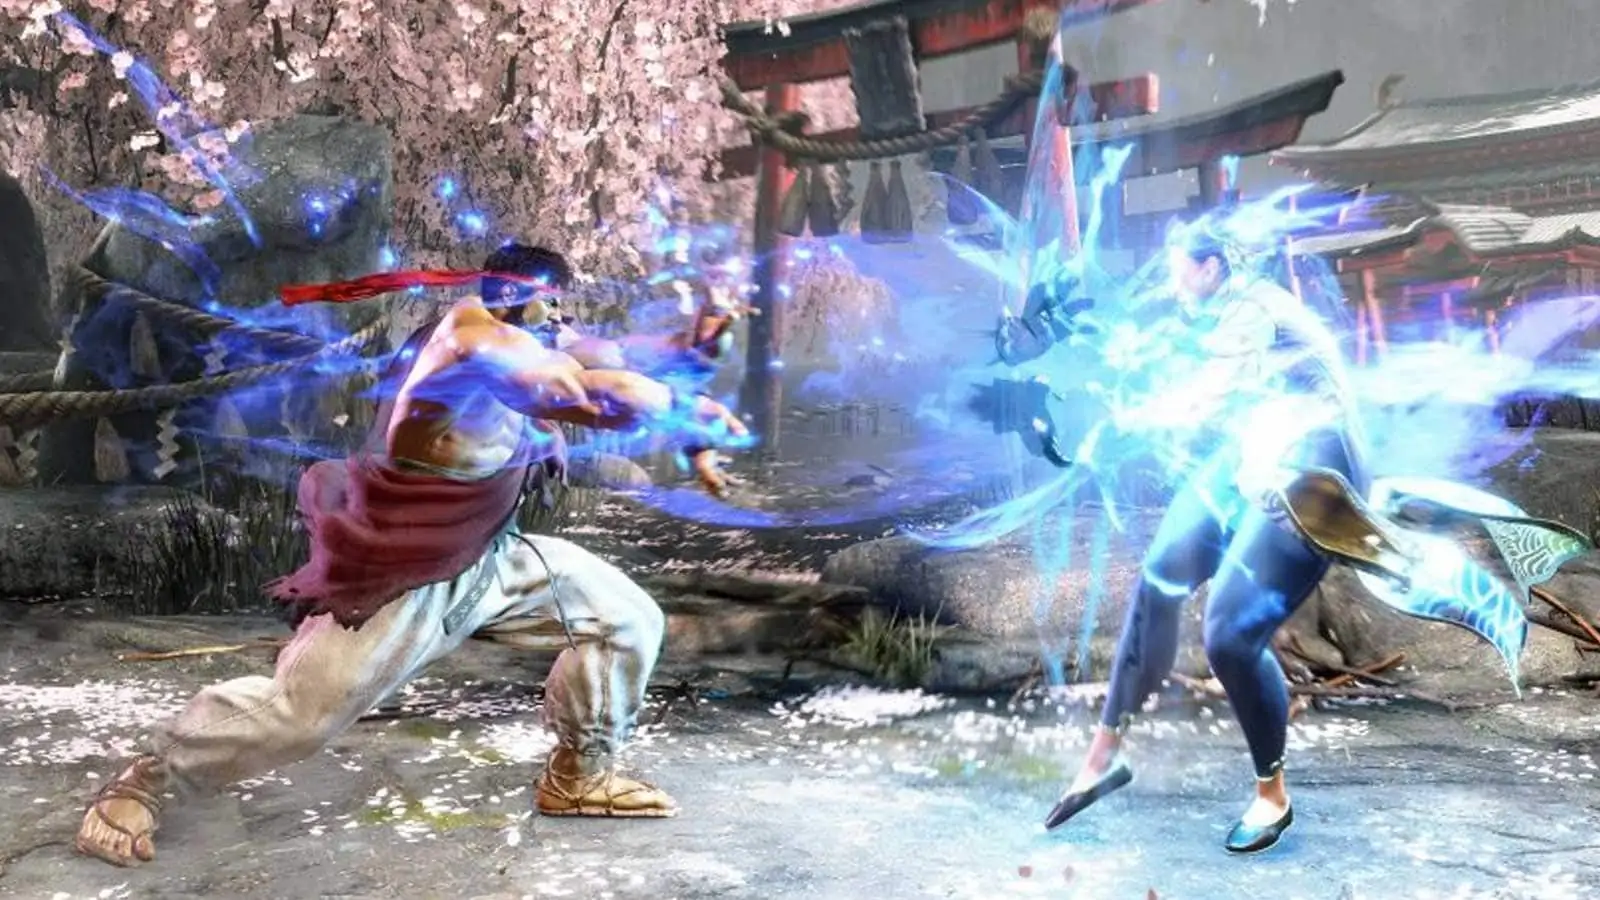 Street Fighter 6 Release Date, New Characters, and Modes Showcased